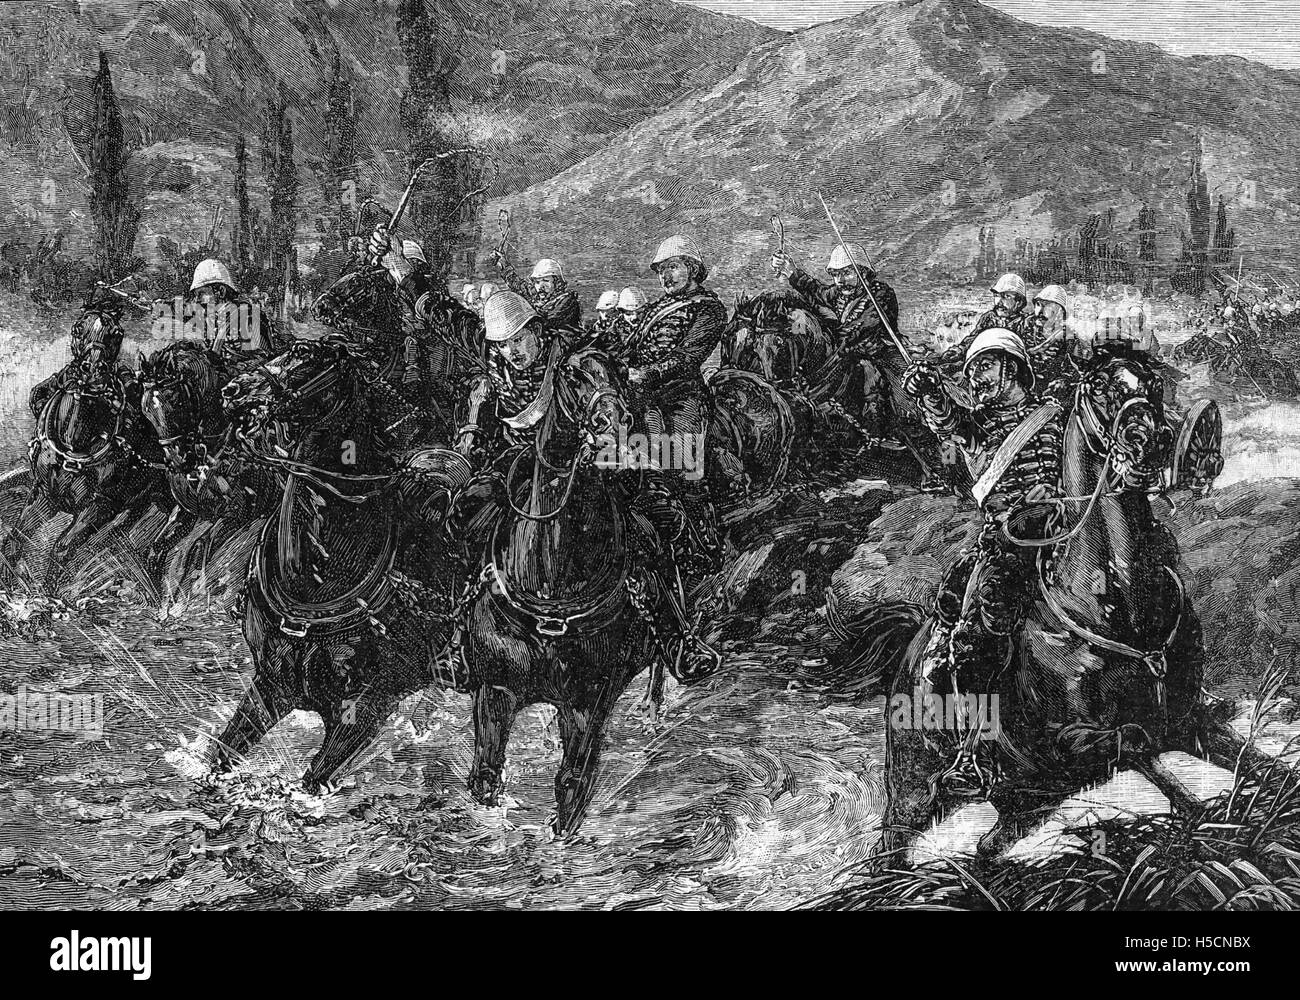 SECOND AFGHAN WAR 1879  British Horse Artillery saving the guns in the Charder Valley in December after being outnumbered Stock Photo